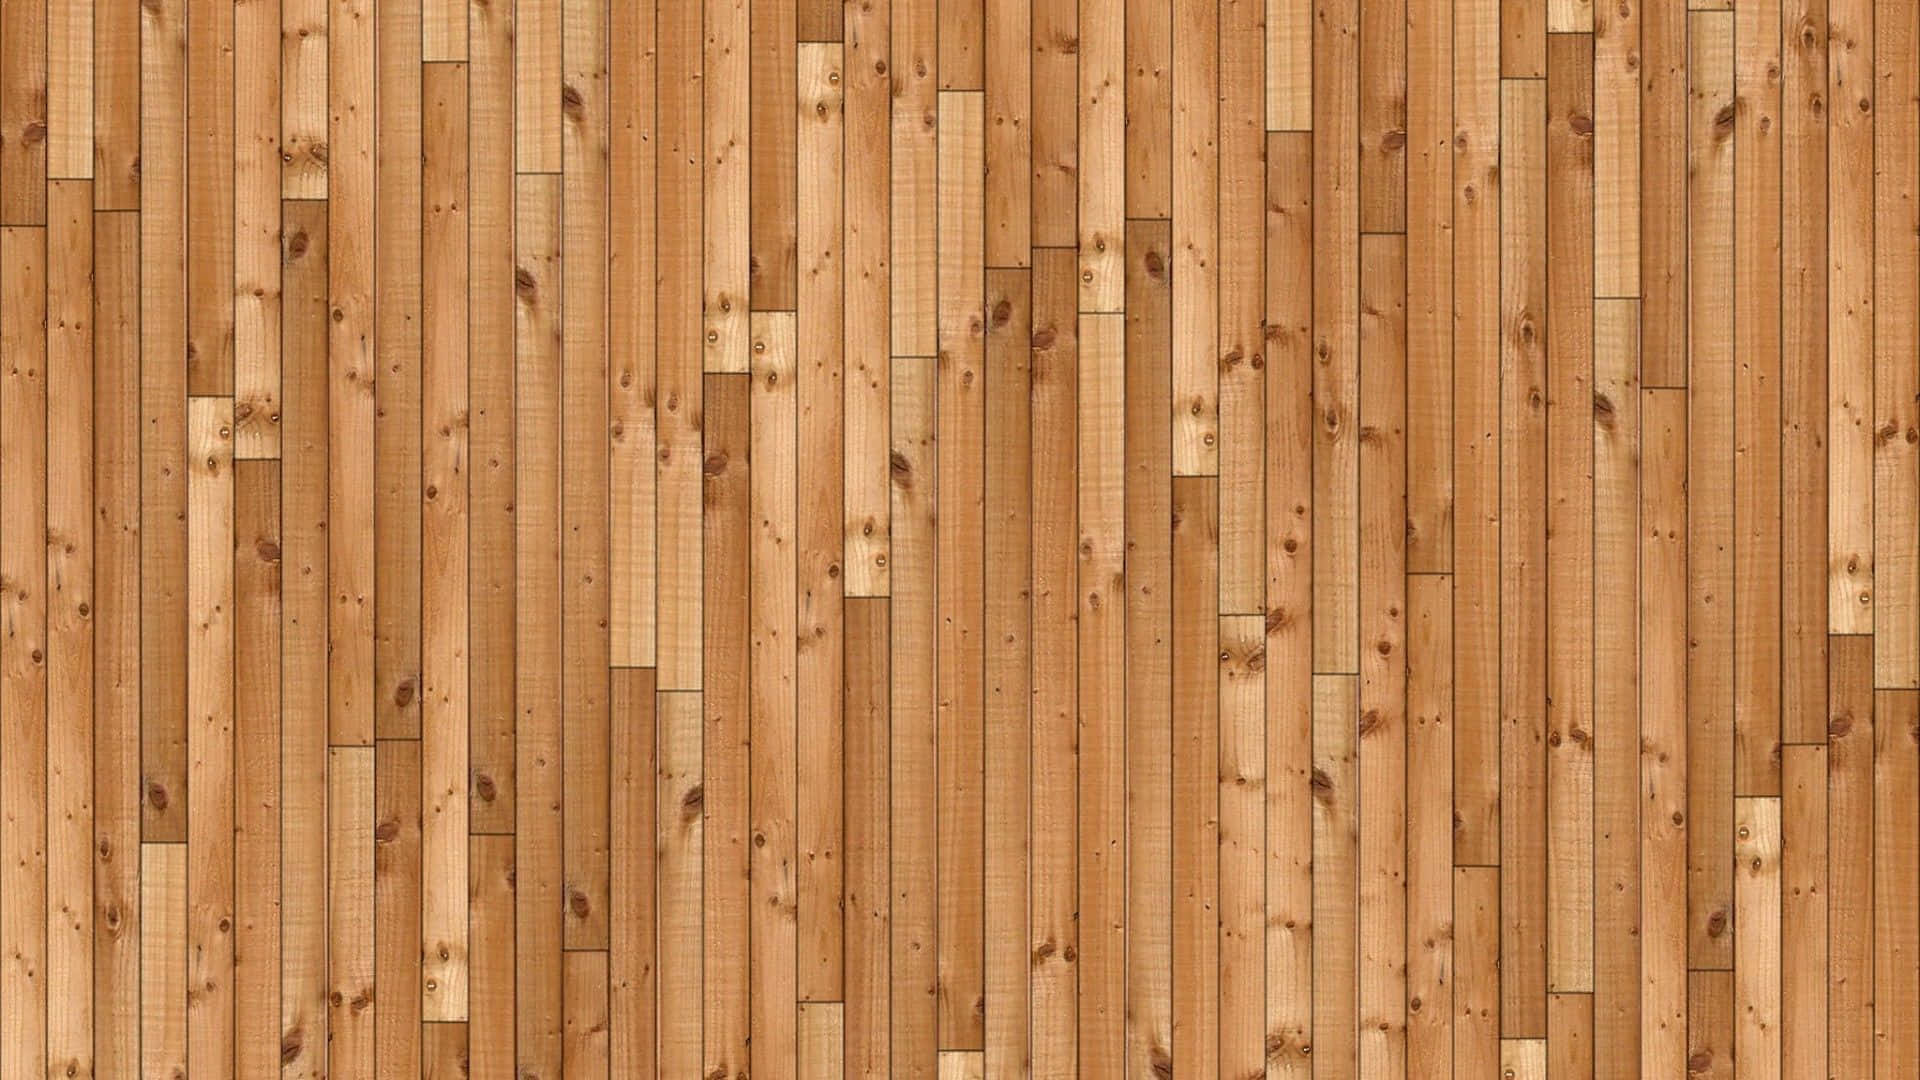 Thin Panels Wooden Background Texture